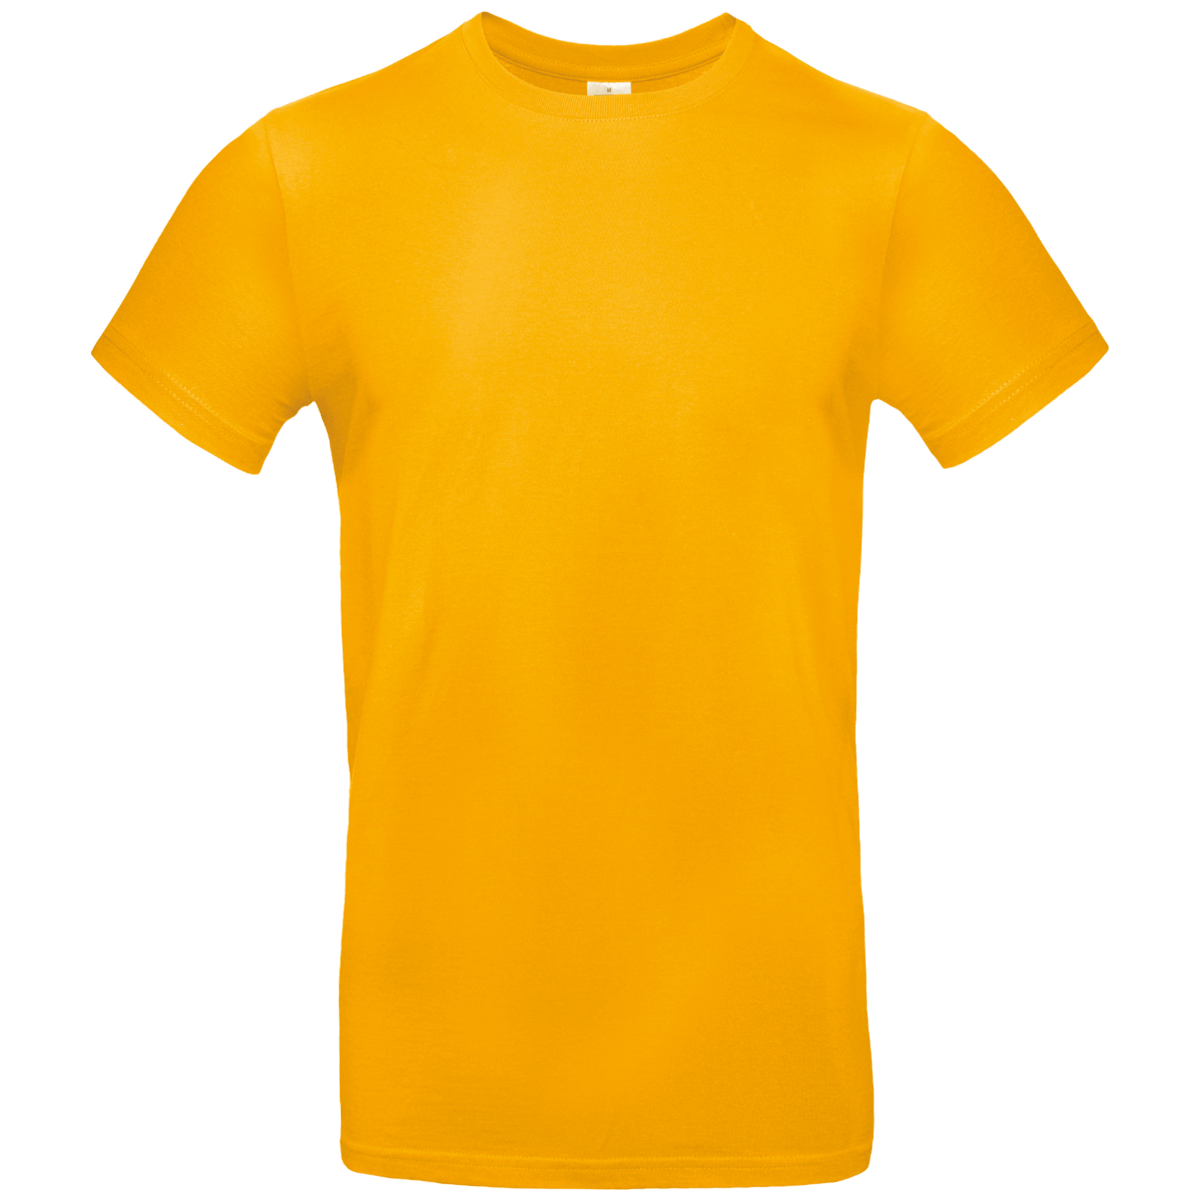 Tee-Shirt Homme Personnalisable Sur Tunetoo Apricot